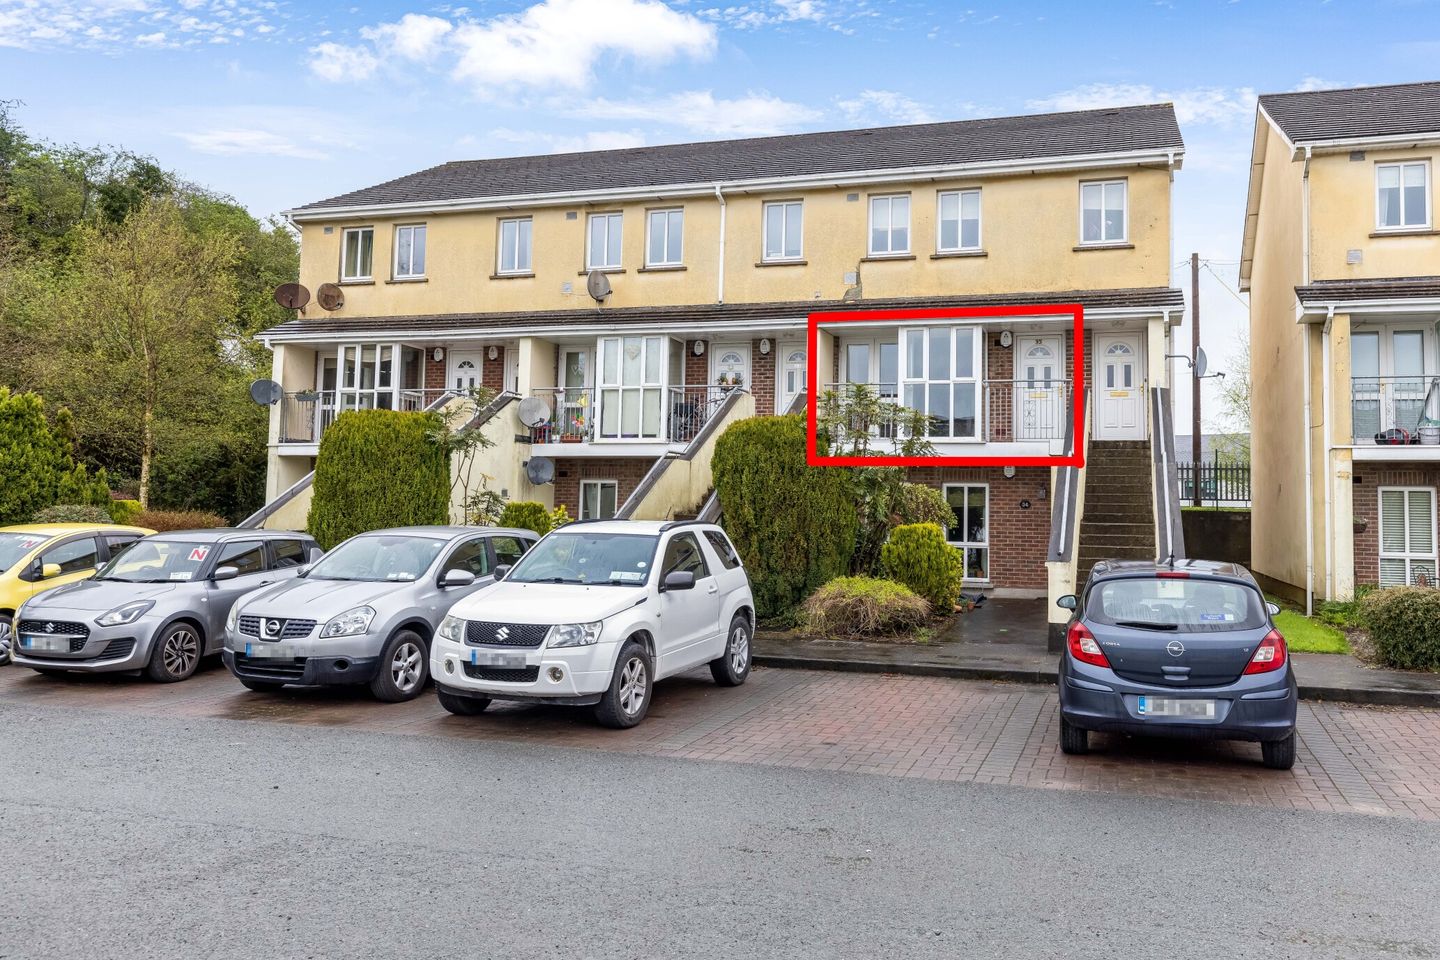 35 Moathill Manor, Athboy Road, Navan, Co Meath, C15E298